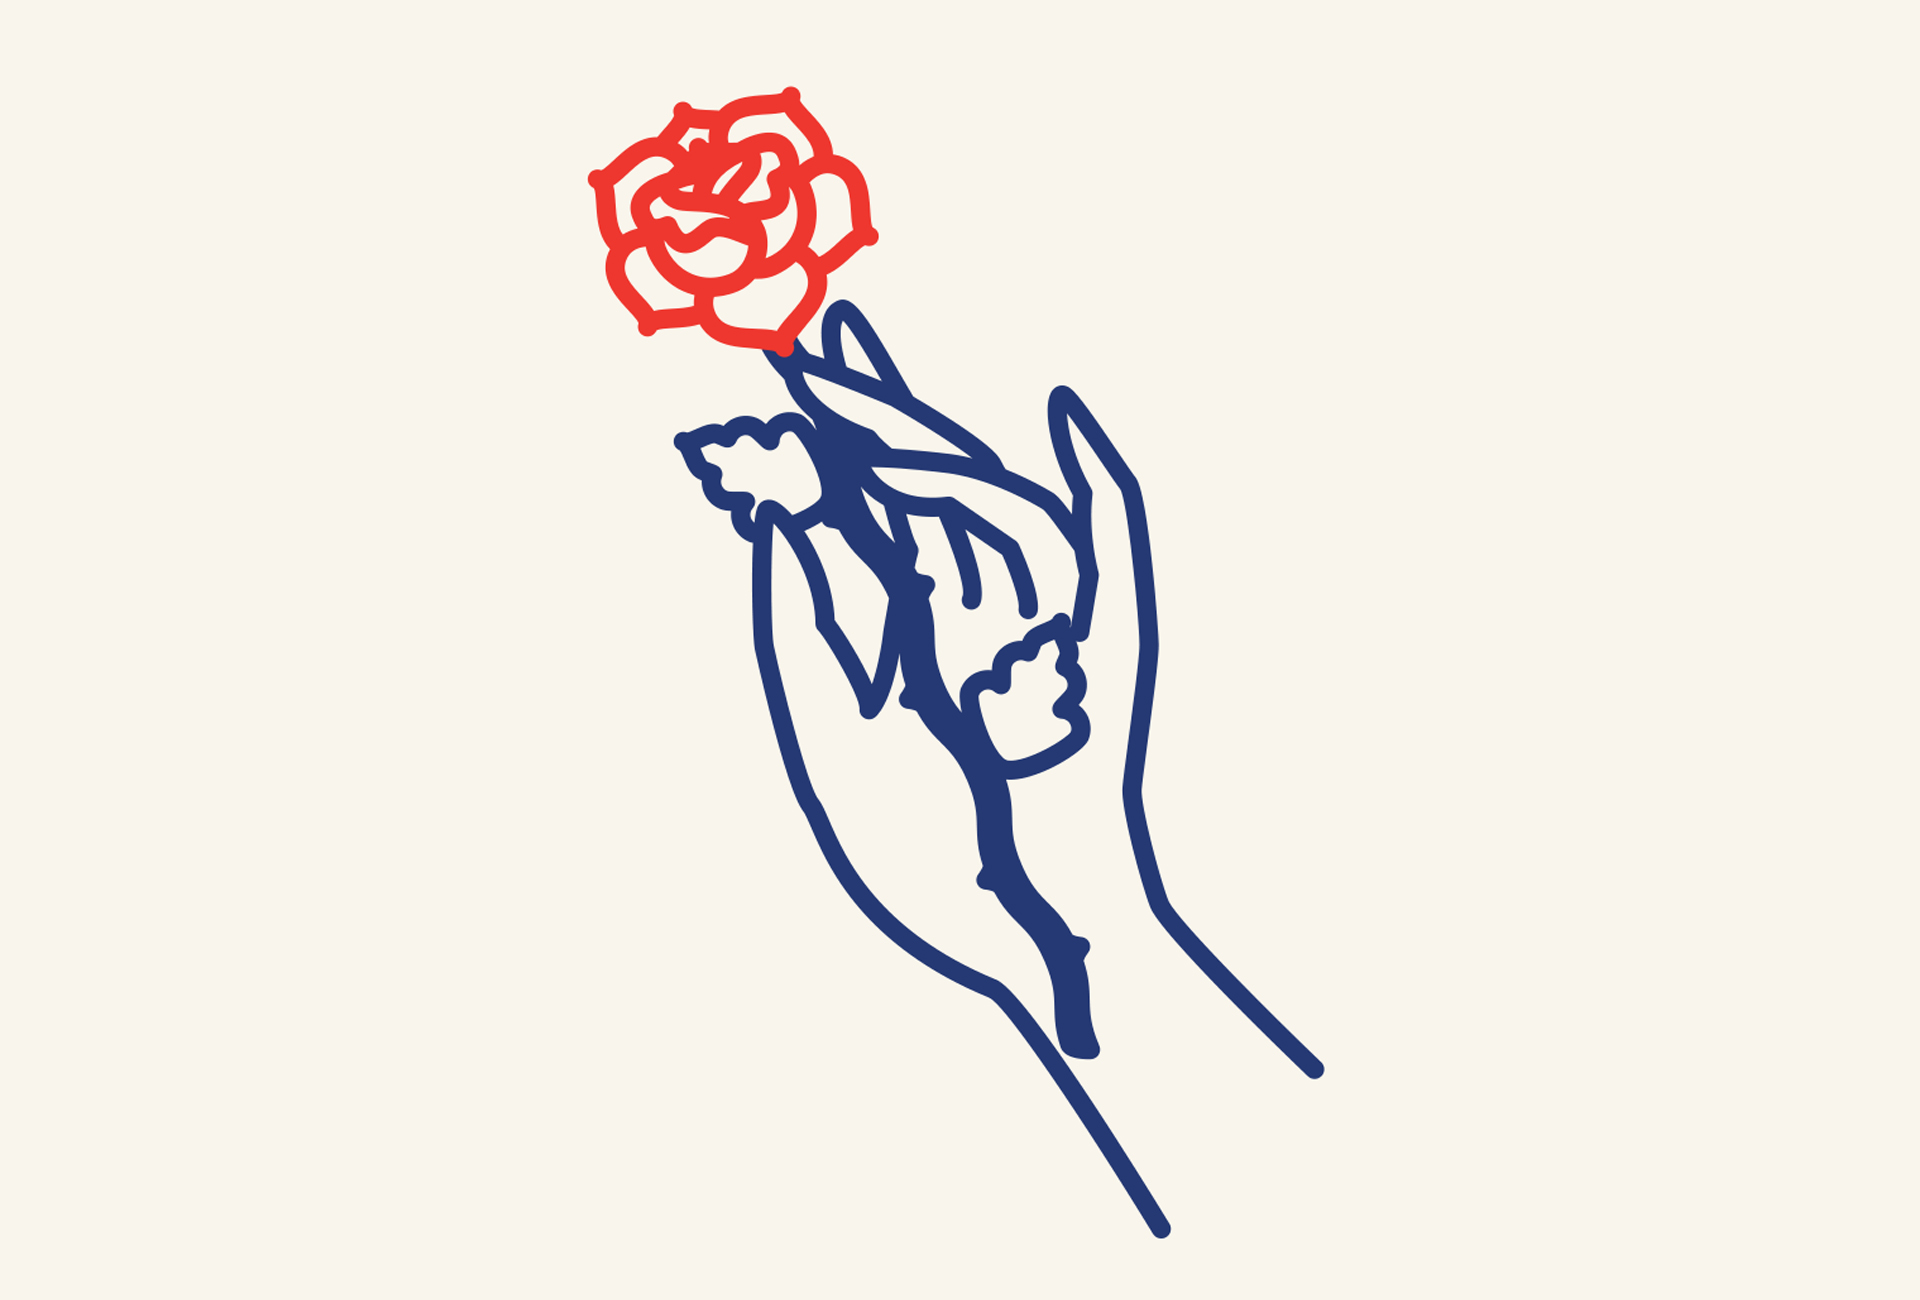 Stylized line illustration of a hand holding a red rose.